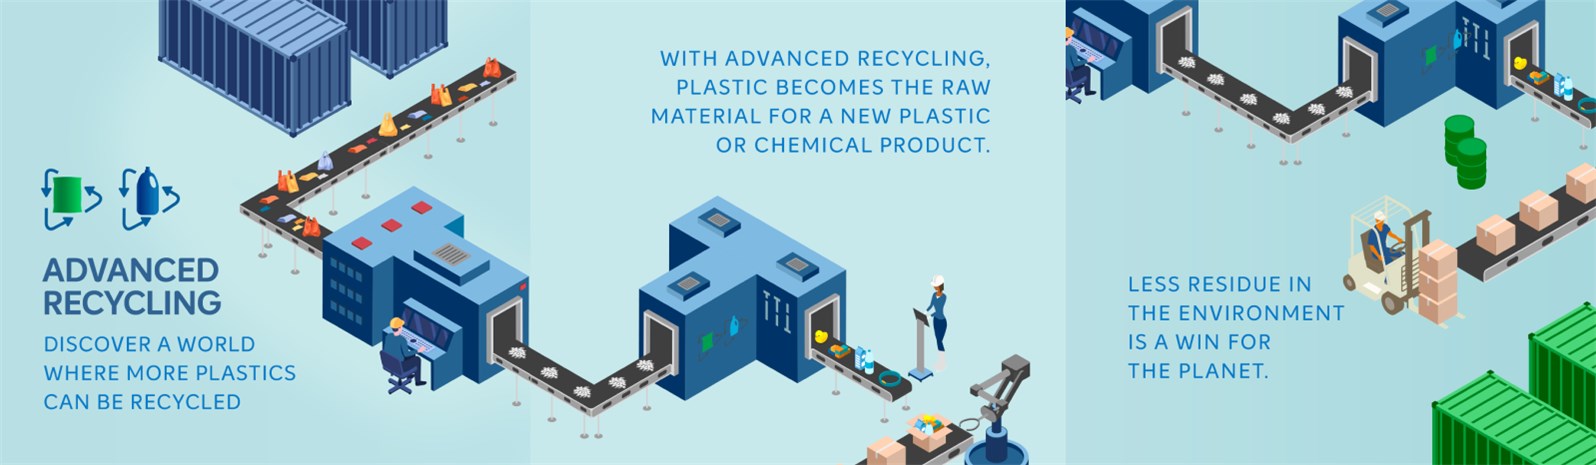 Braskem will produce certified circular PP utilizing Nexus Circular's commercial-scale advanced recycling technology.